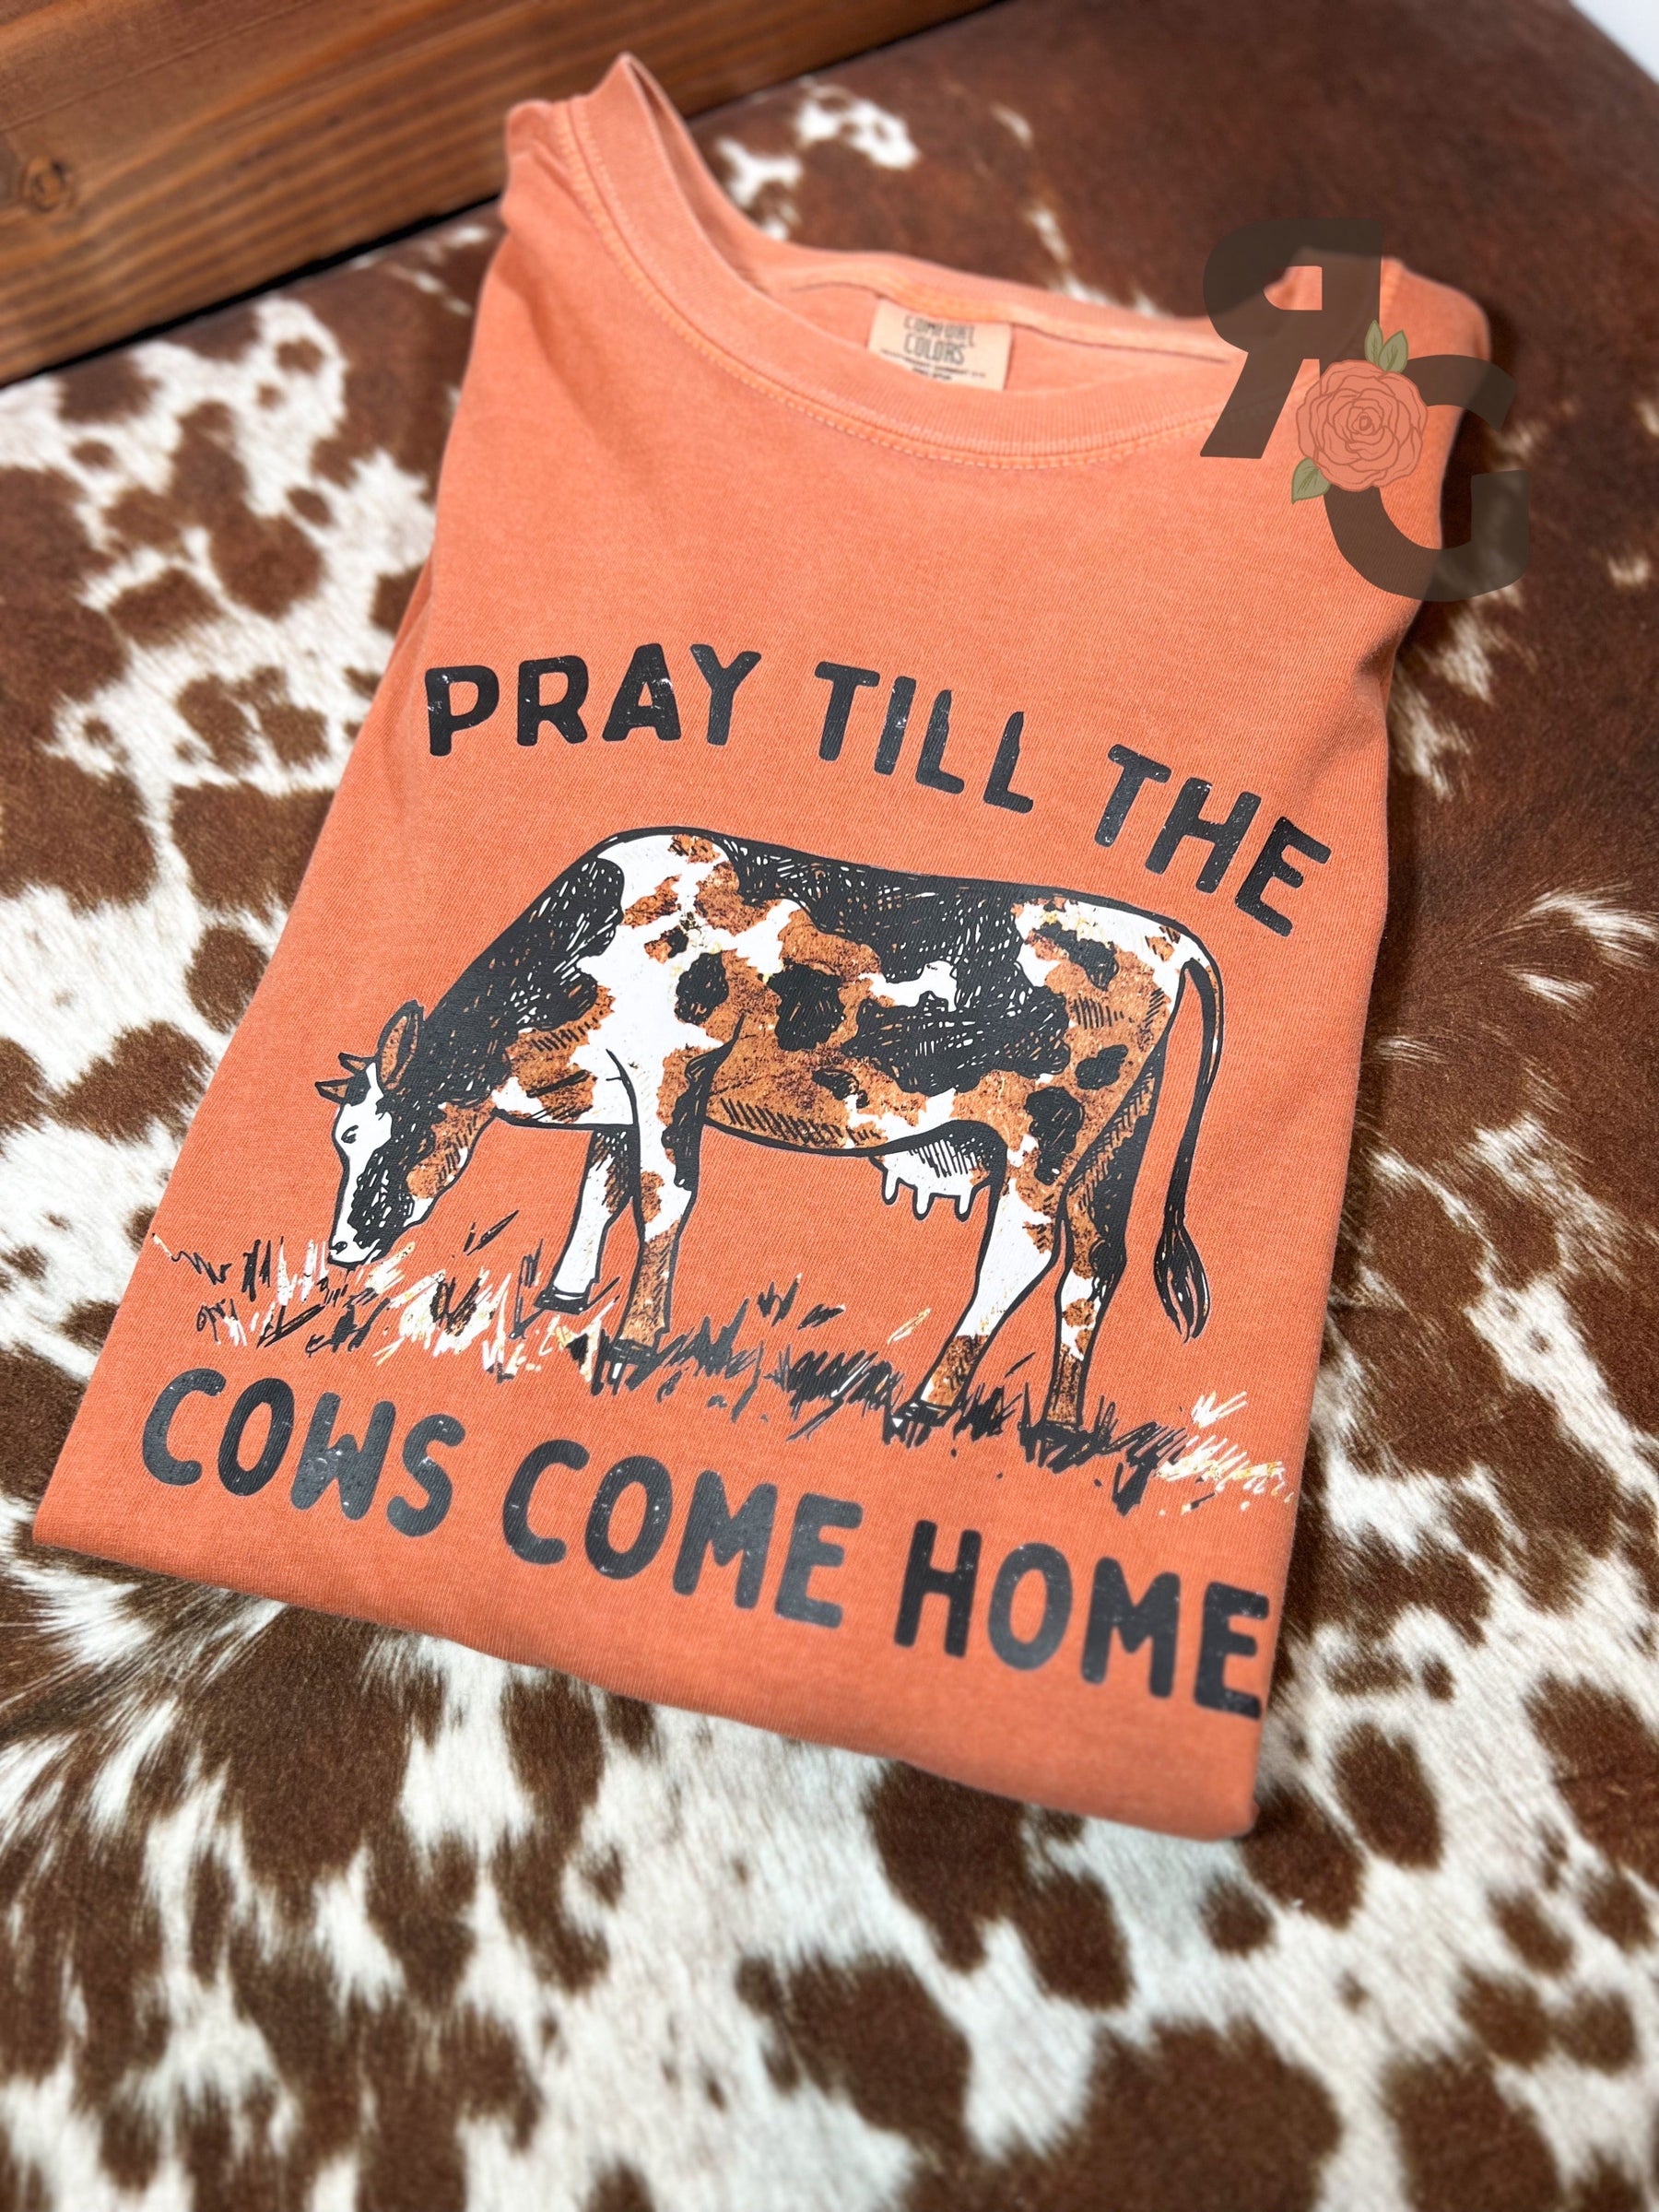 Pray Till The Cows Come Home - Shirt or Sweatshirt *YOU PICK COLOR*